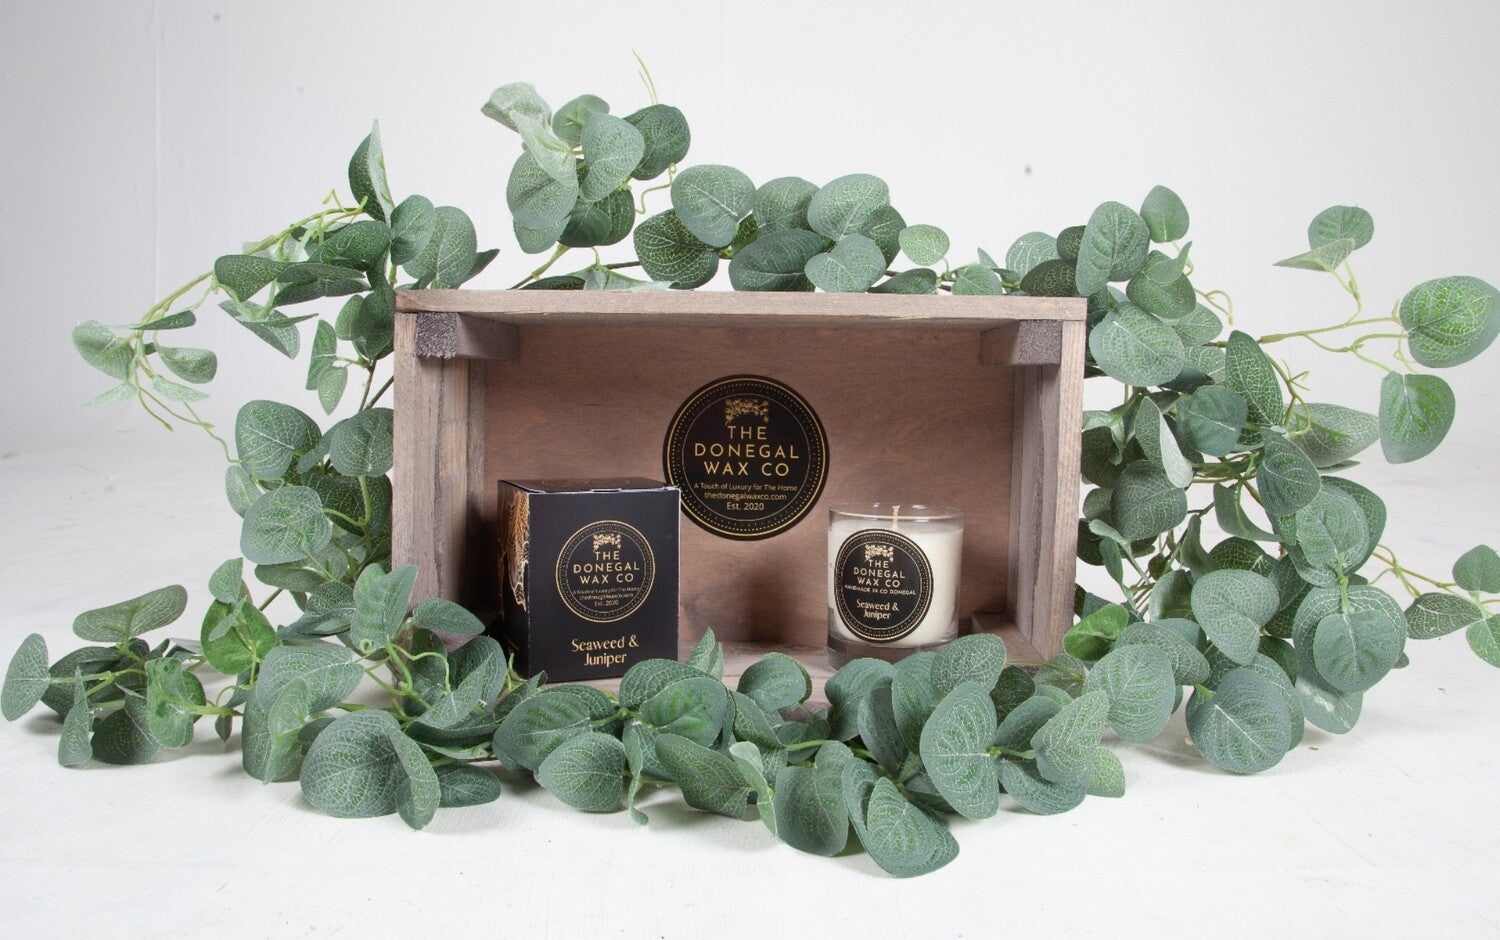 Donegal Luxury Wax Soy Candle Seaweed & Juniper – The Donegal Shop